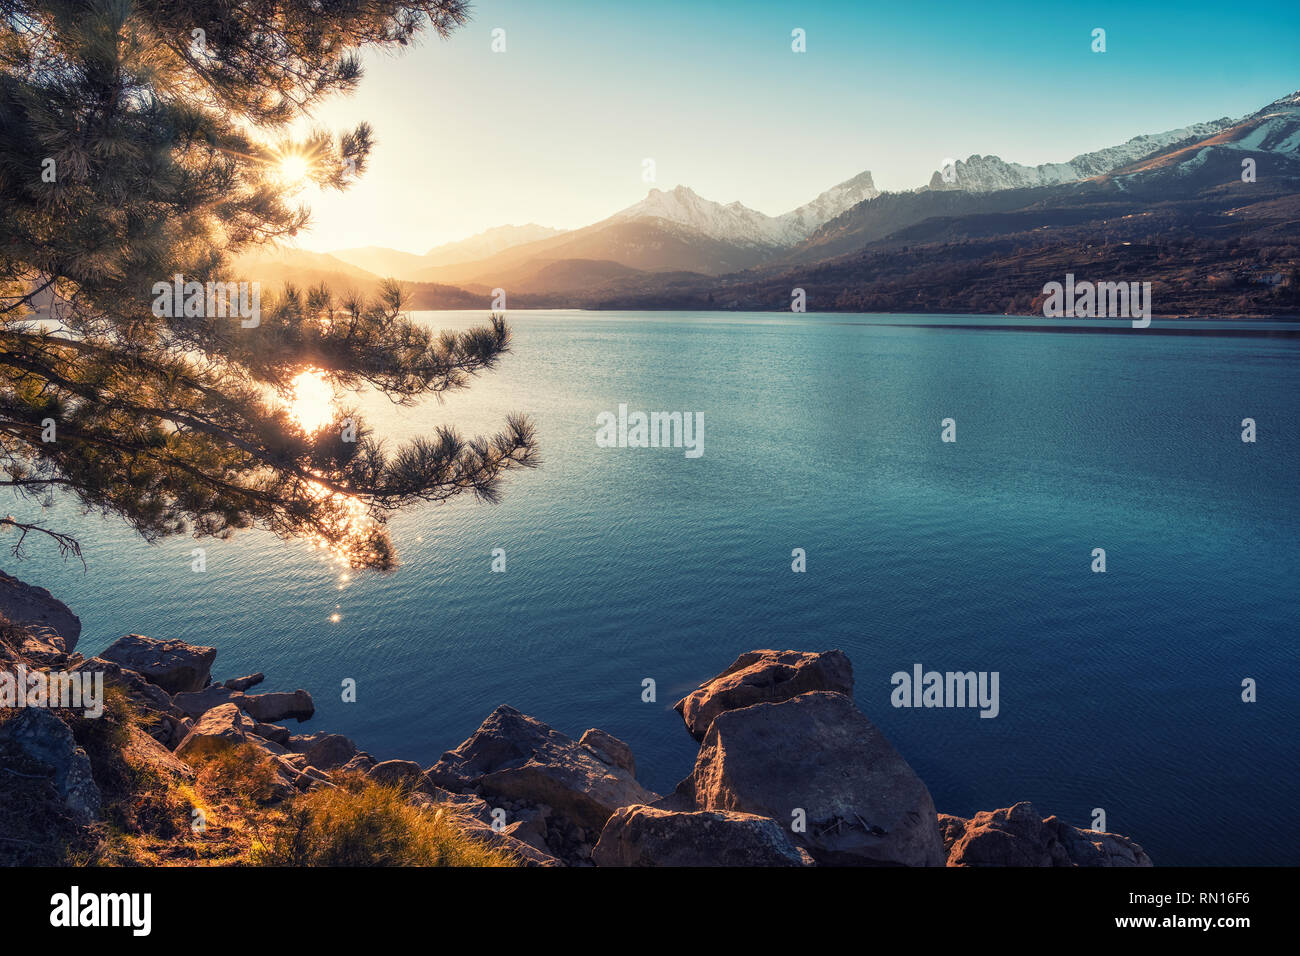 Late afternoon sunshine filtering through a pine tree on the banks of Lake Calacuccia in Corsica with snow capped Paglia Orba mountain in the distance Stock Photo